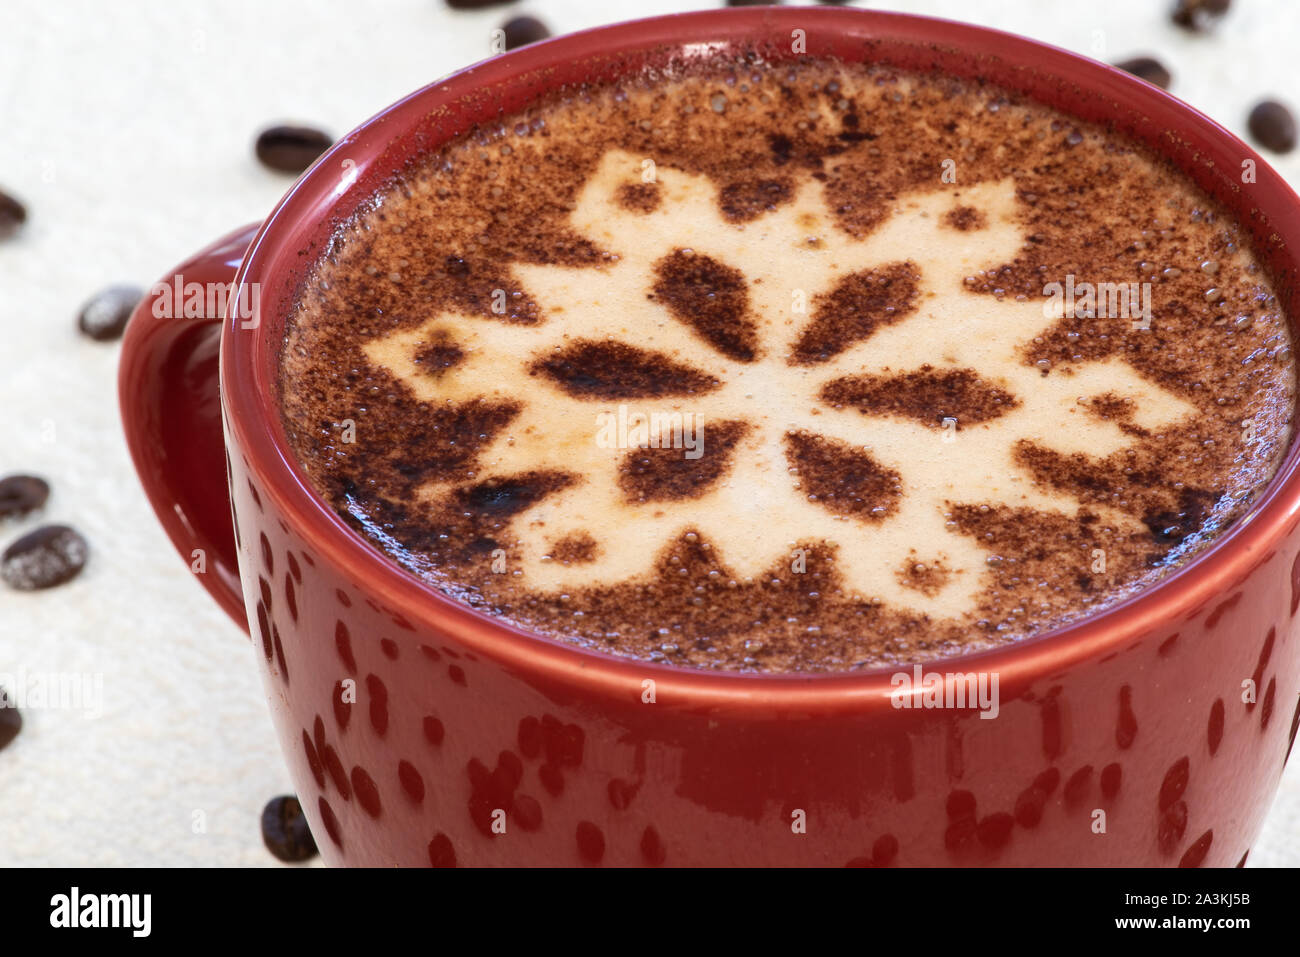 A cappuccino with chocolate snowflake motif, snowy background and scattering of coffee beans sets the scene for a festive Christmas heartwarming drink Stock Photo